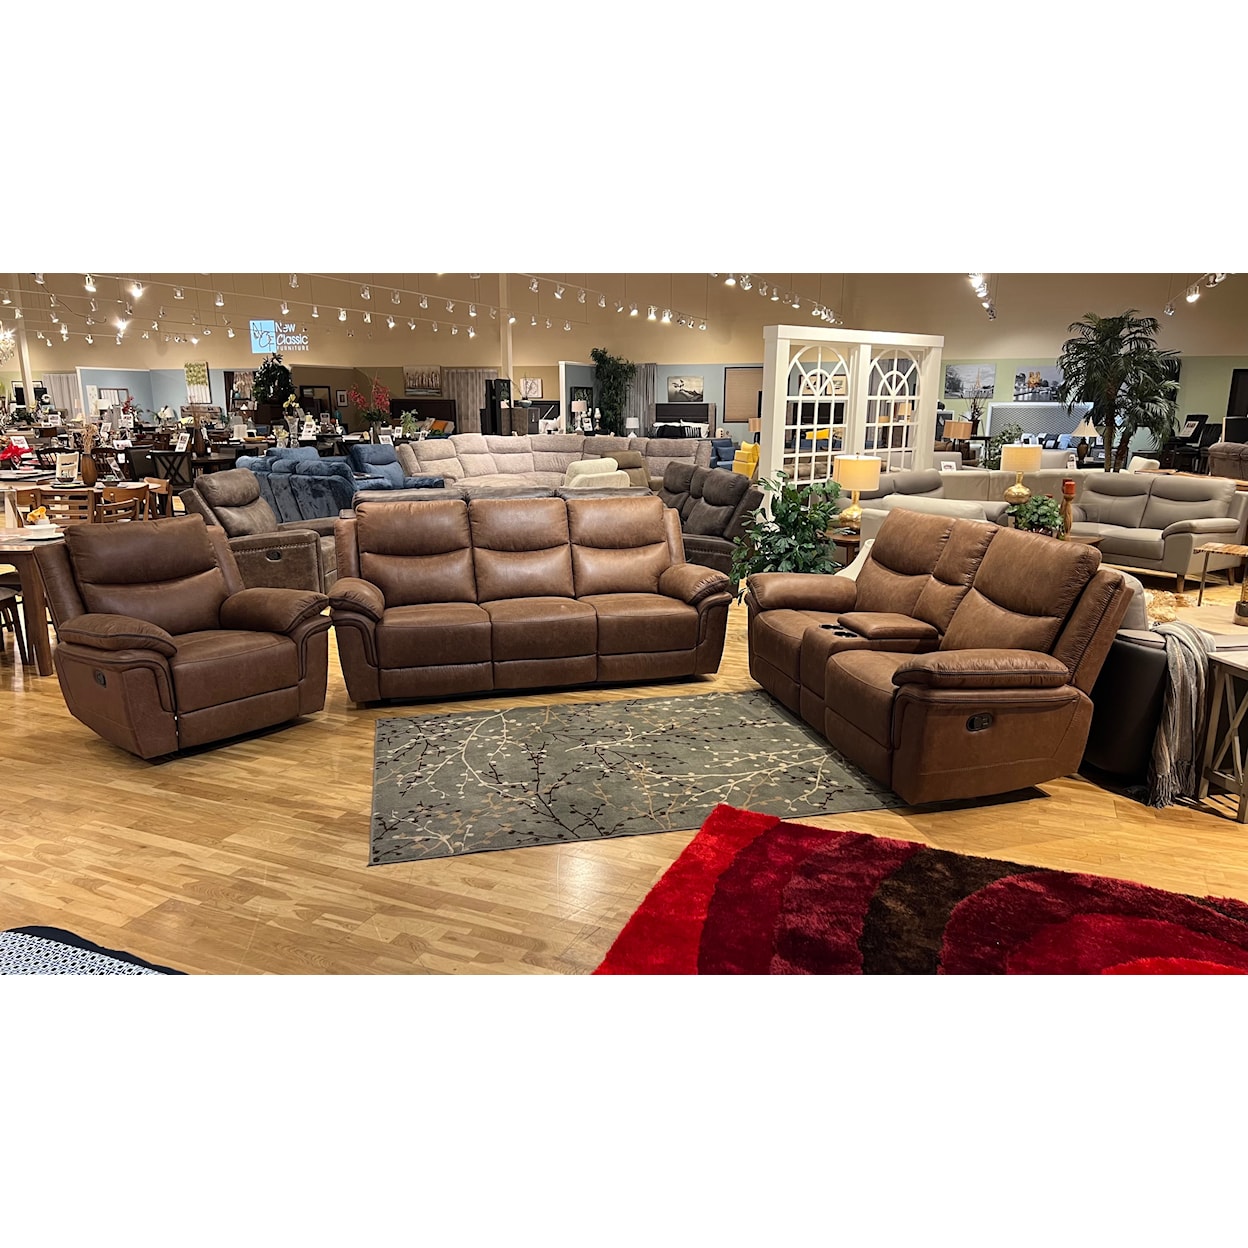 New Classic Ryland Glider Recliner